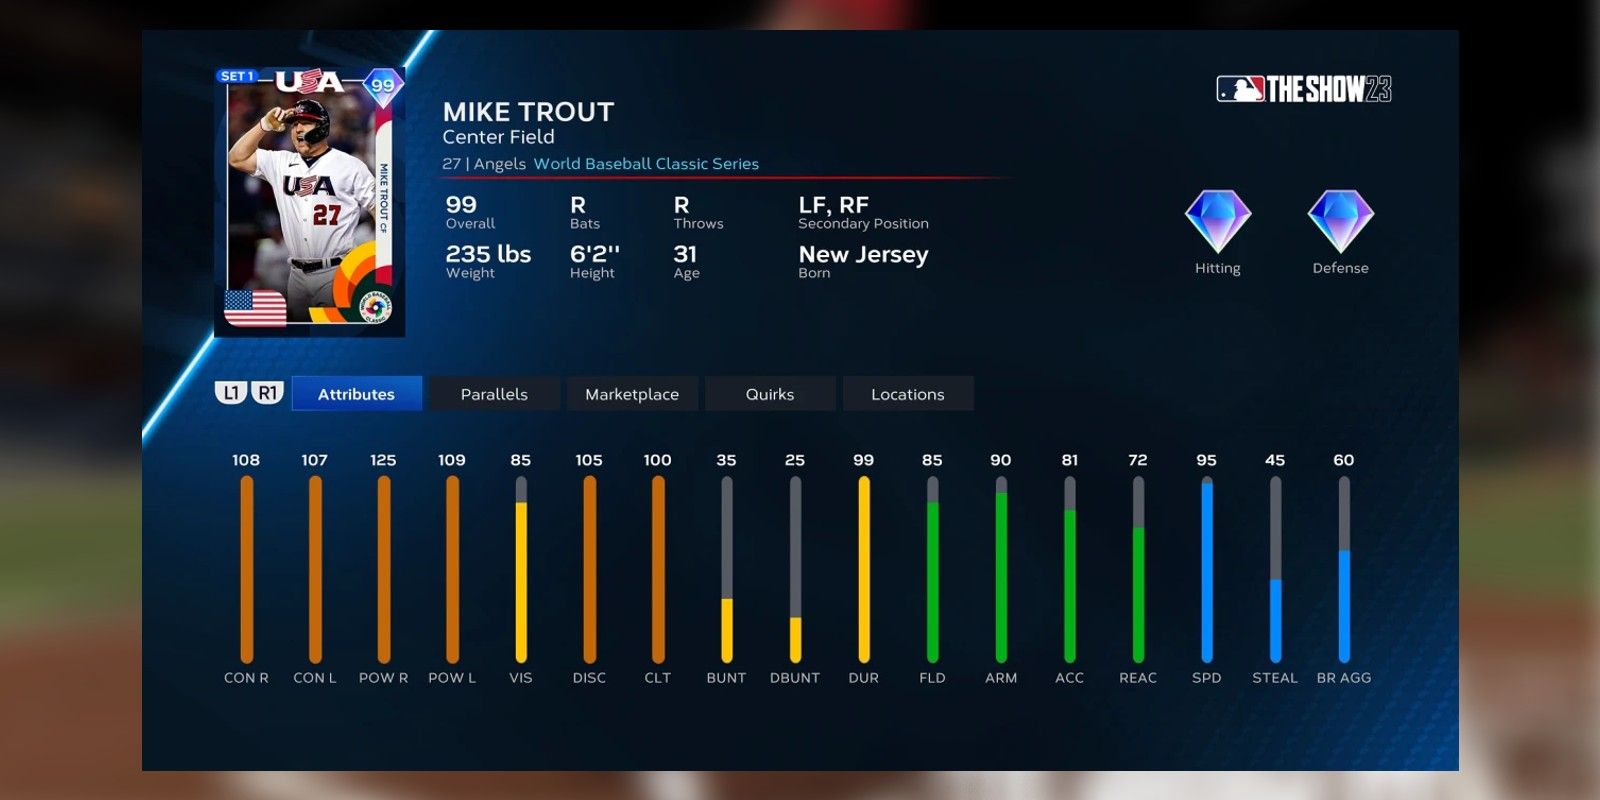 Mike Trout is one of the best overall picks for a line up in MLB The Show 2023